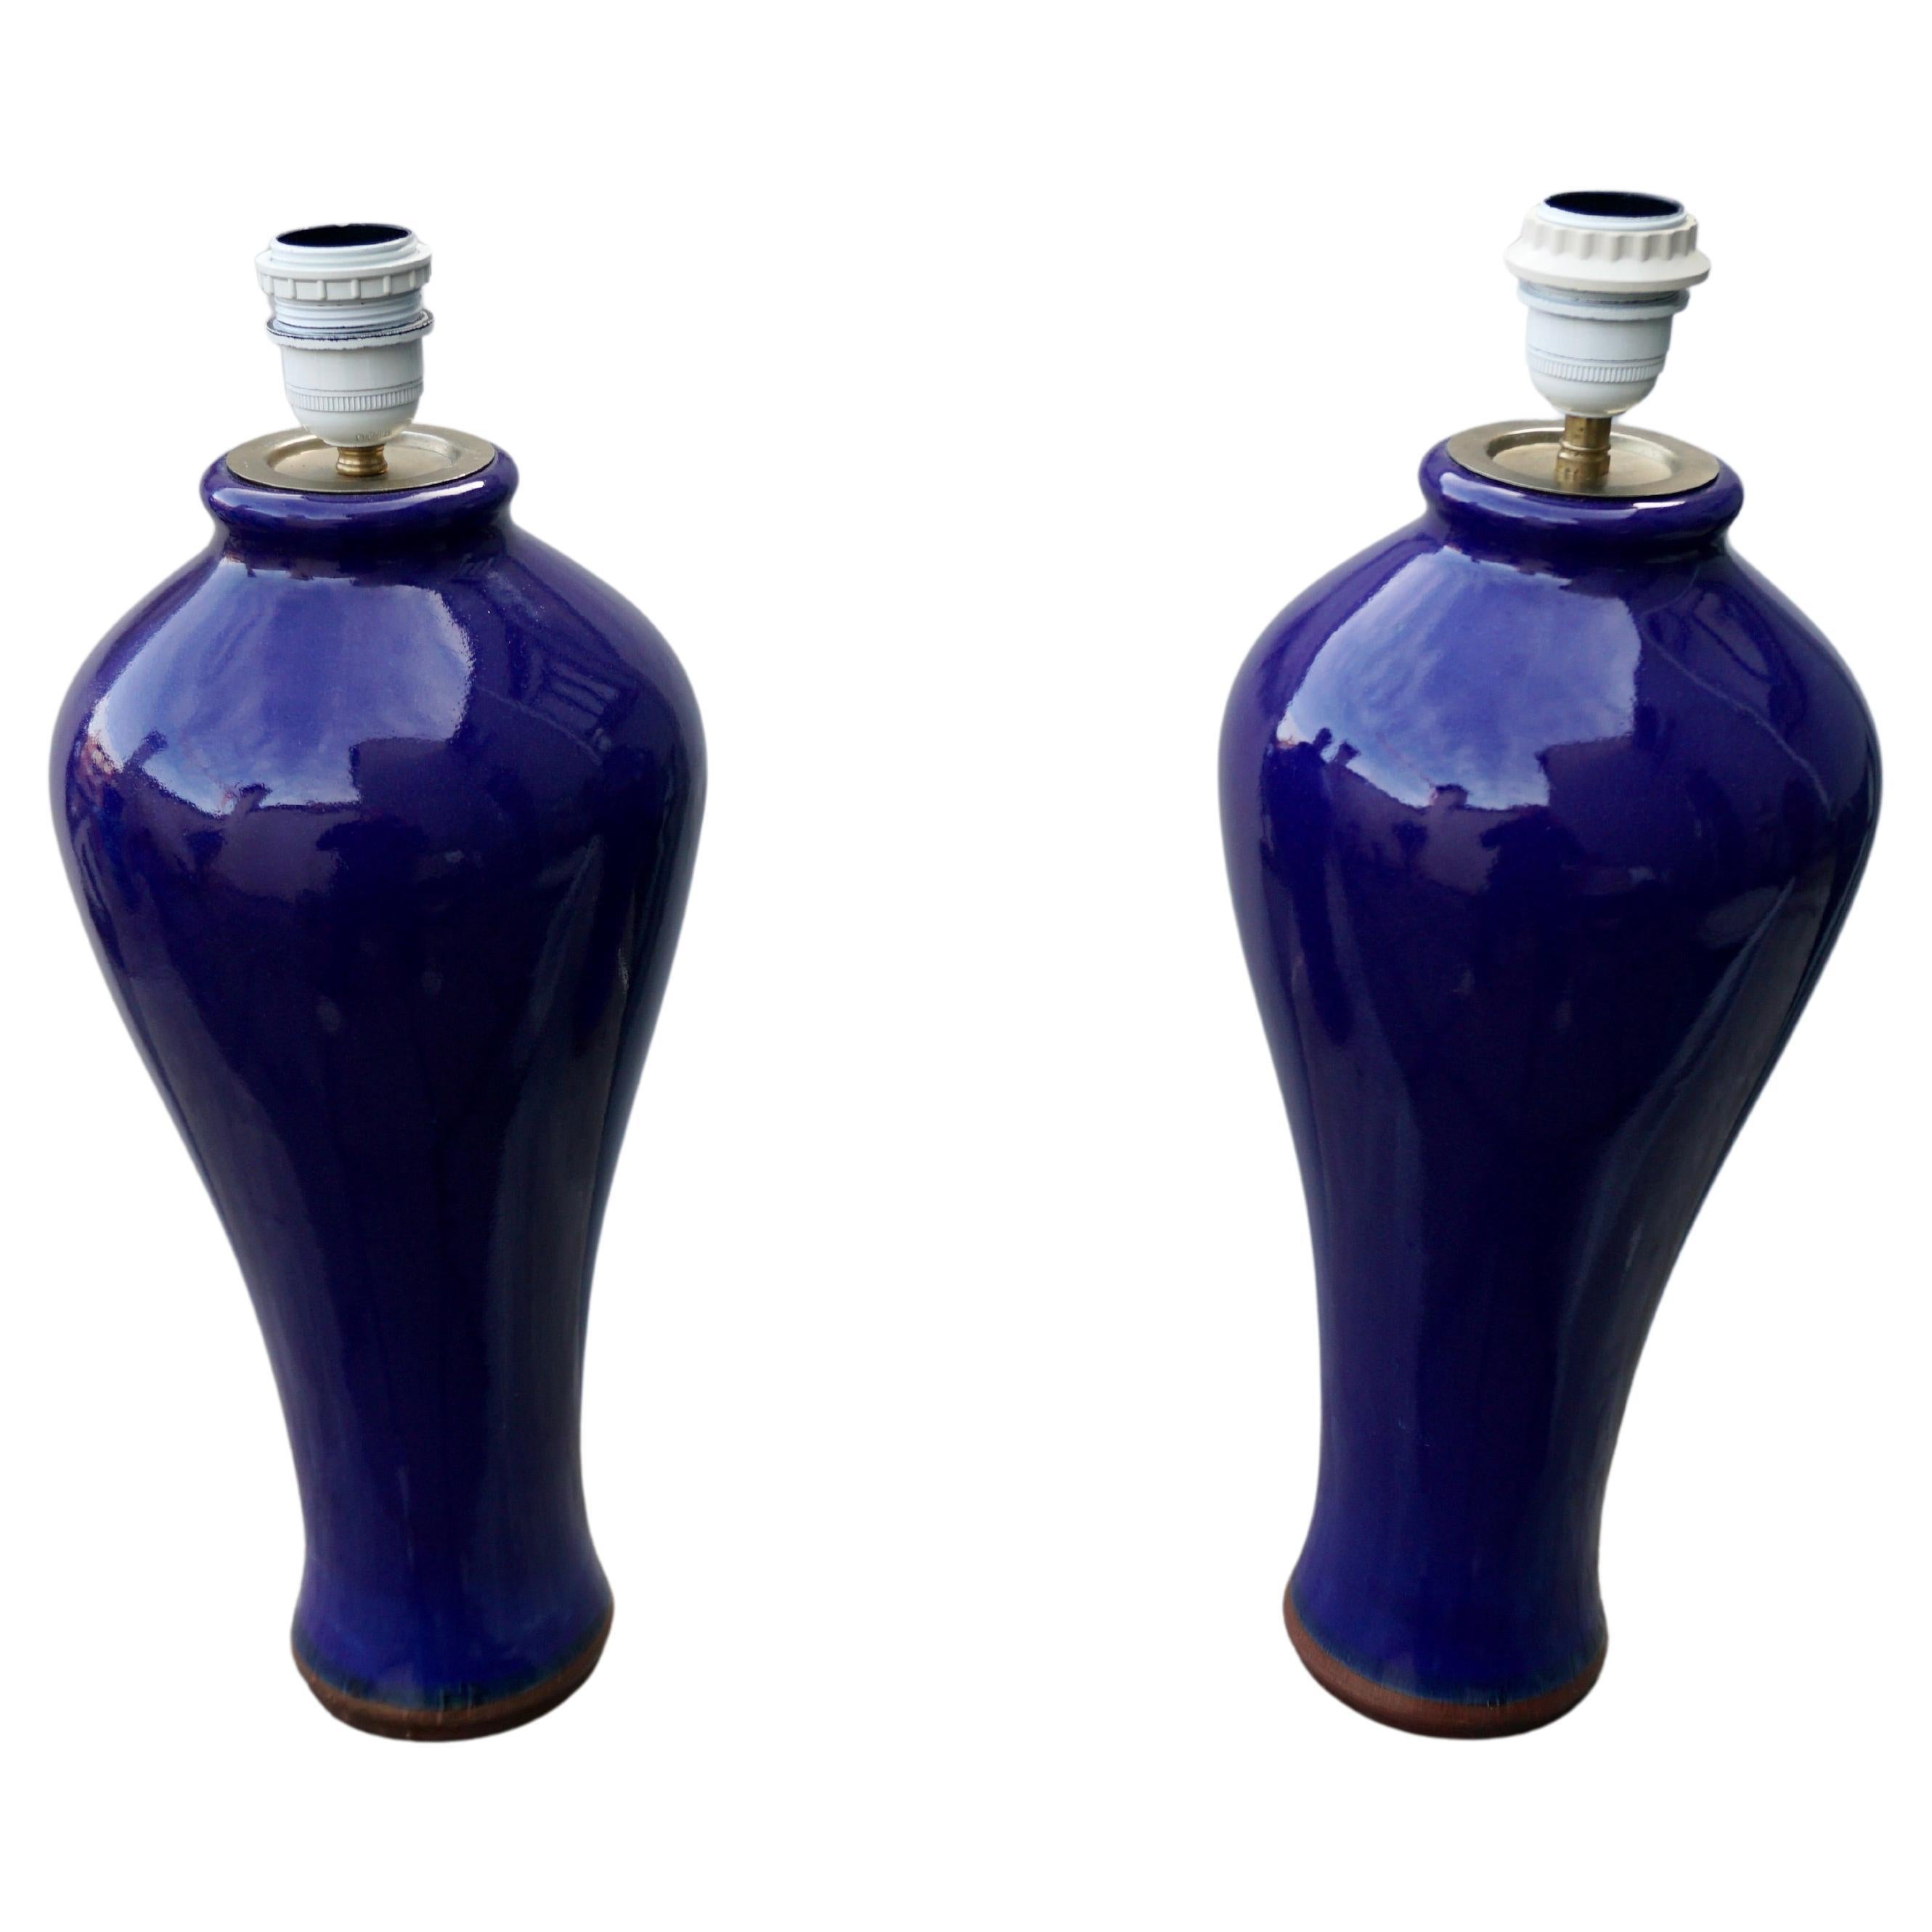 Pair of Cobalt Blue Vases, Wired into Lamps